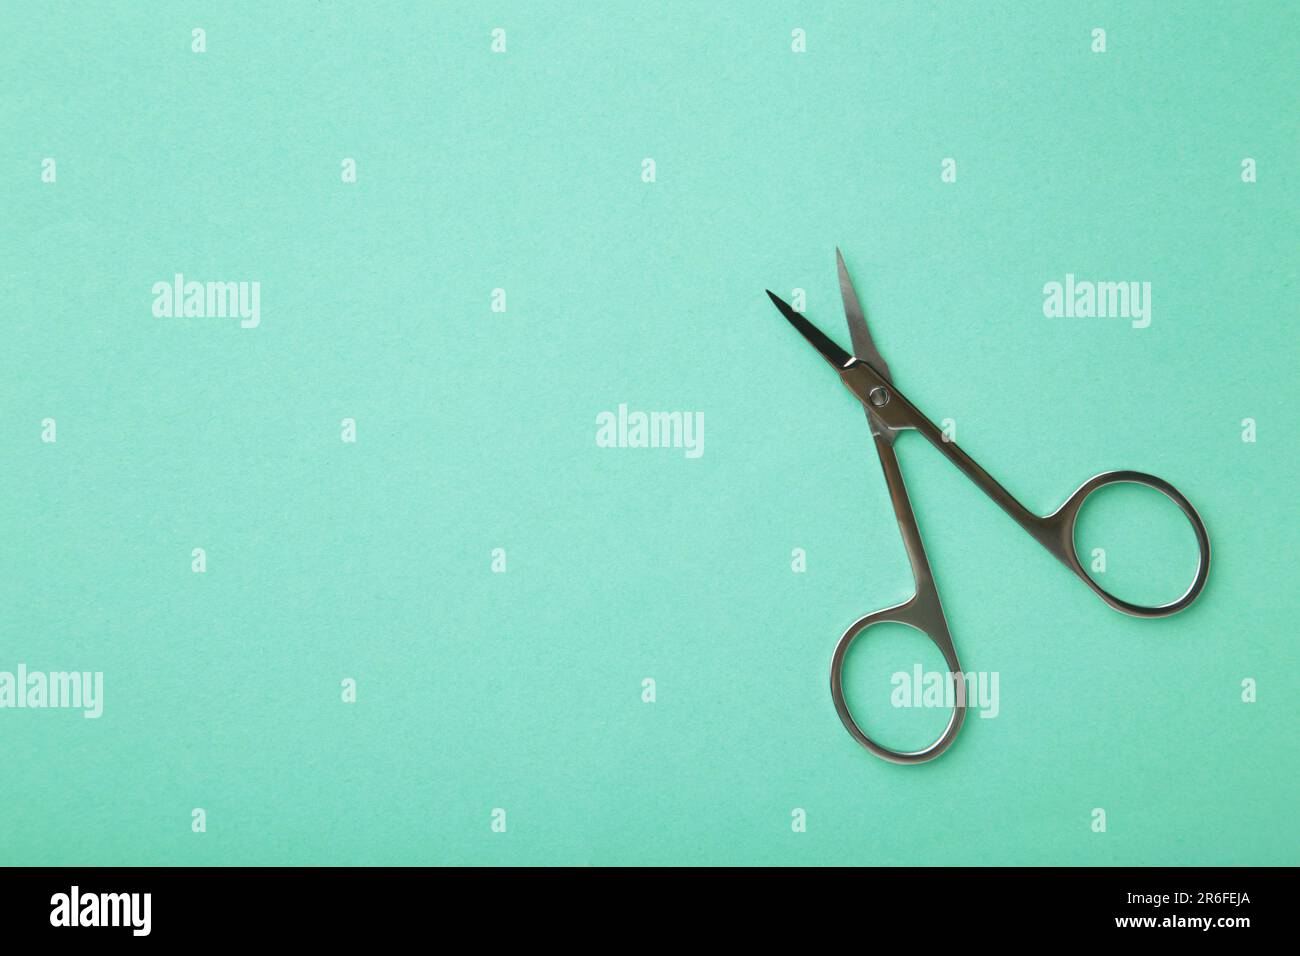 Small metal manicure scissors on mint background with copy space. Top view Stock Photo